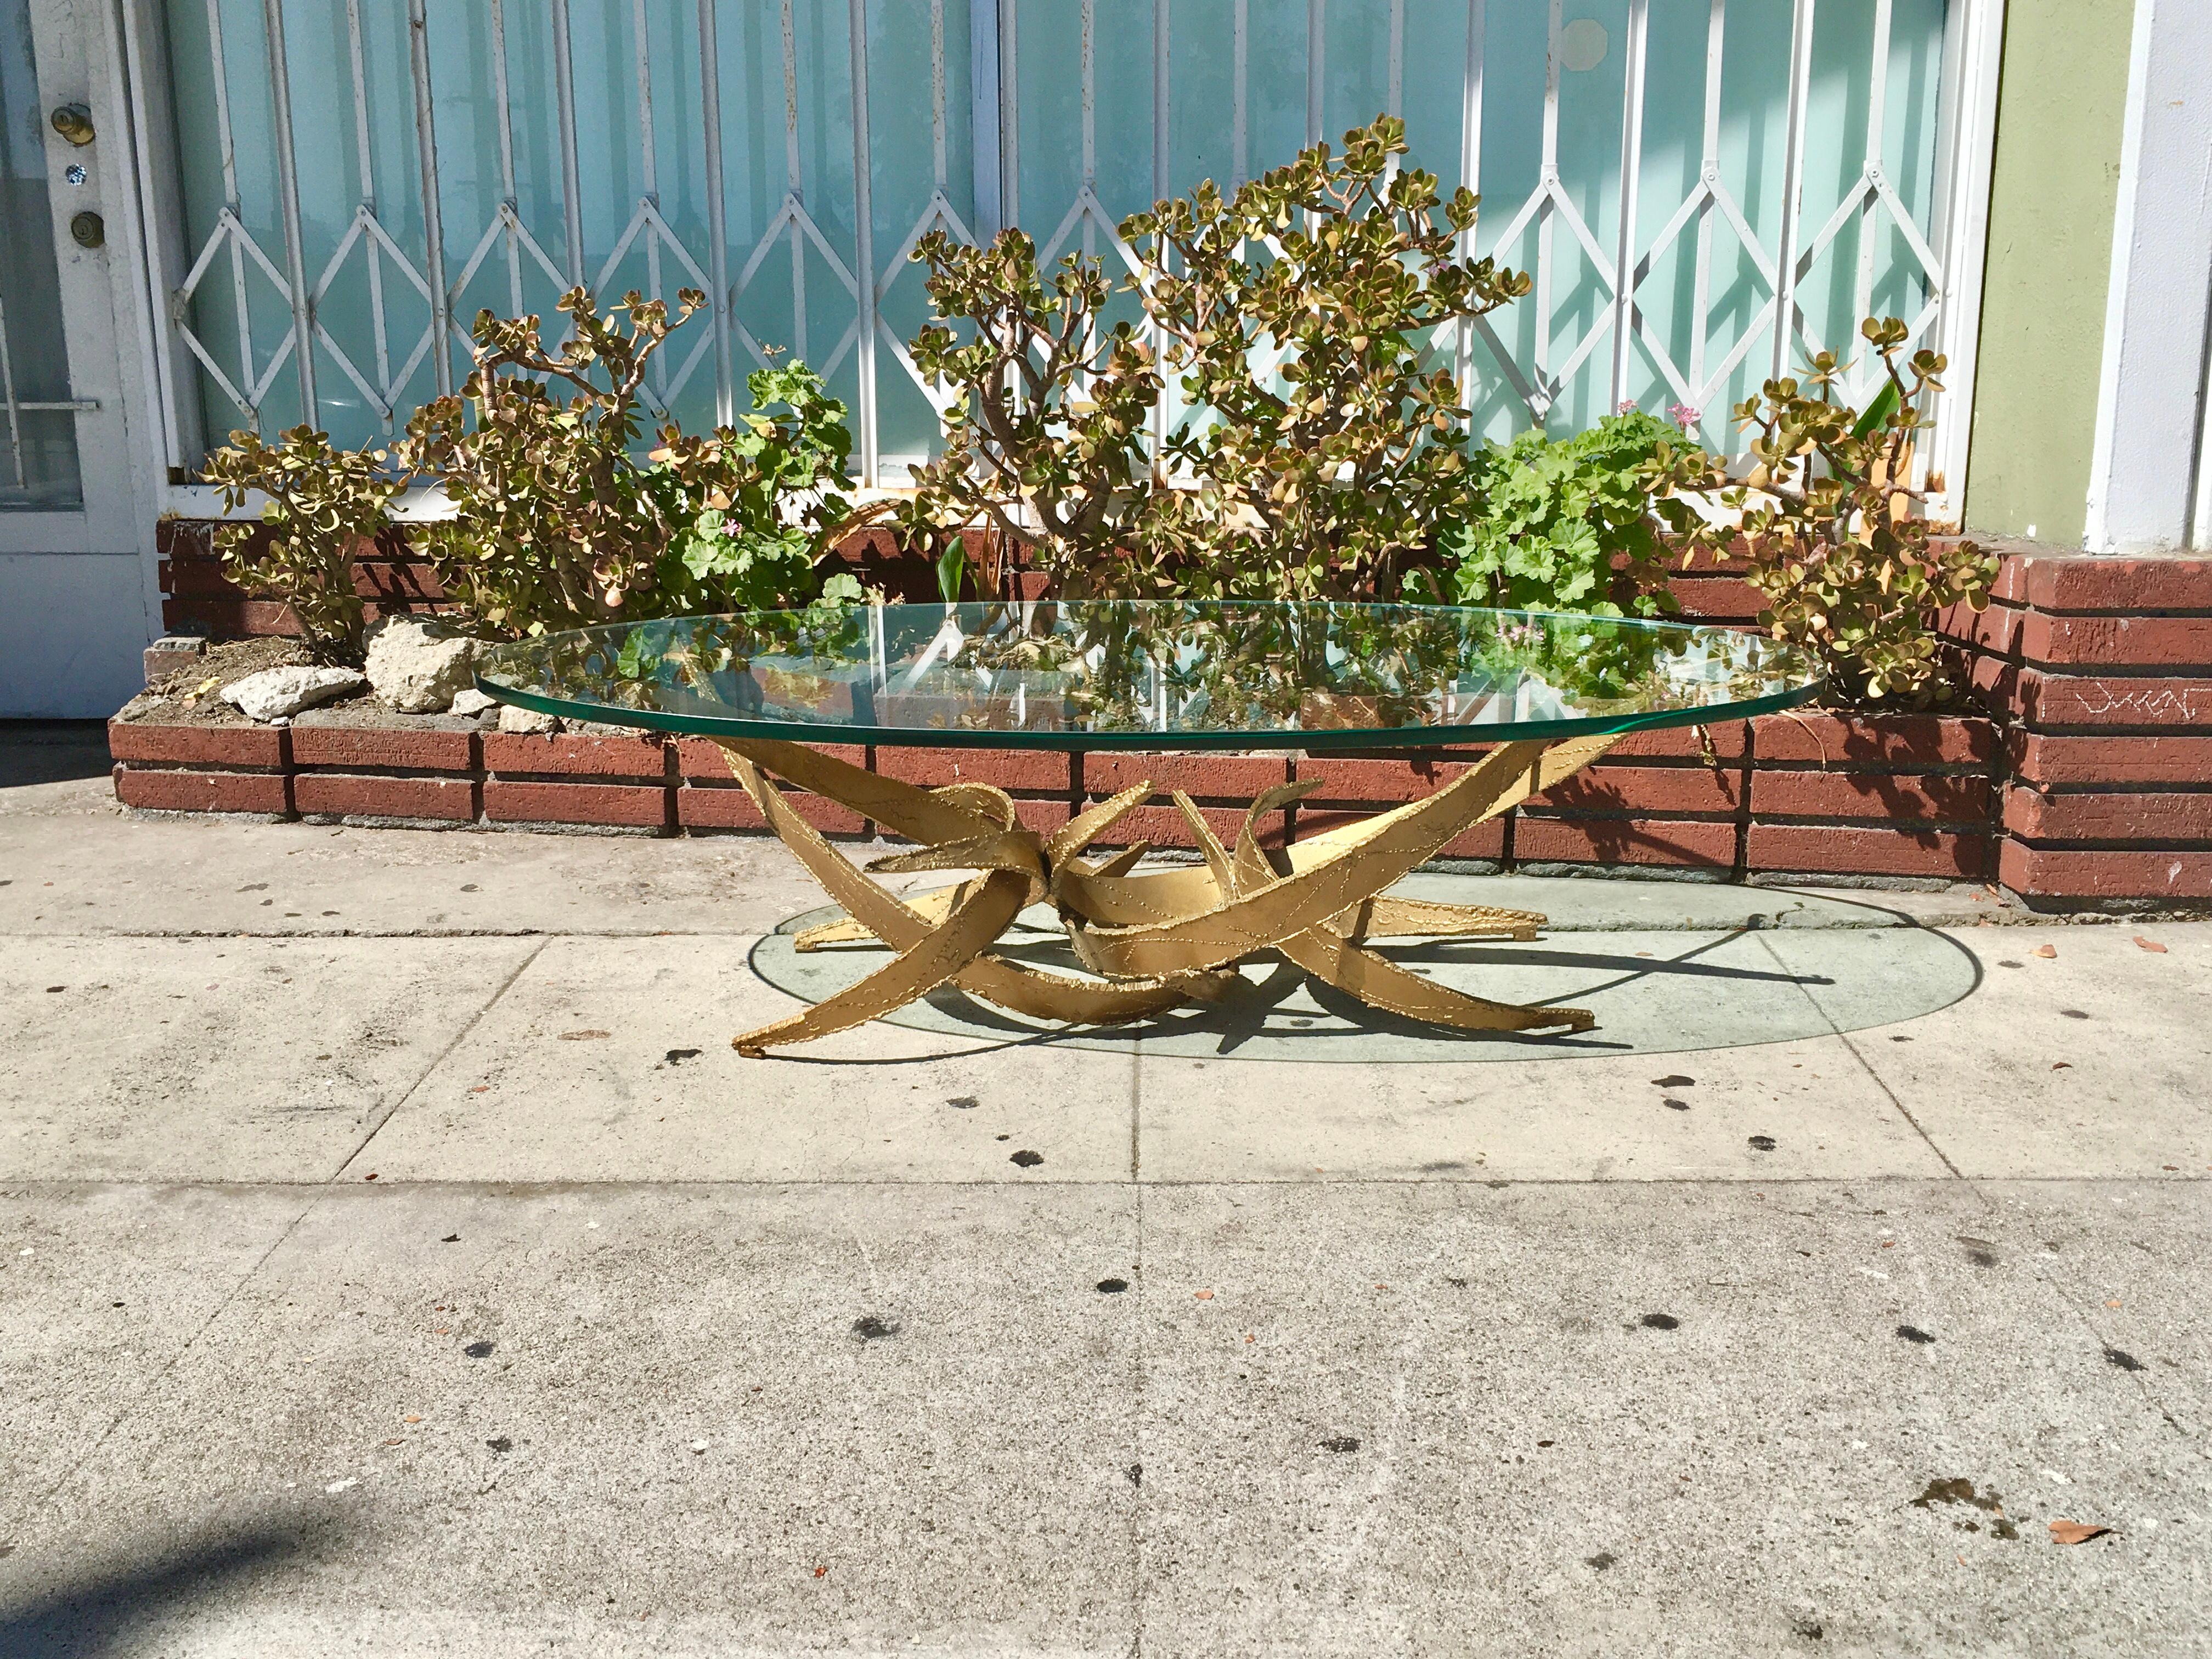 This stunning sculptural brutalist coffee table was designed and manufactured by Silas Seandel in the united states circa 1960s. This fantastic coffee table features a curved gold-tone torch-cut metal formed into an organically abstract structure